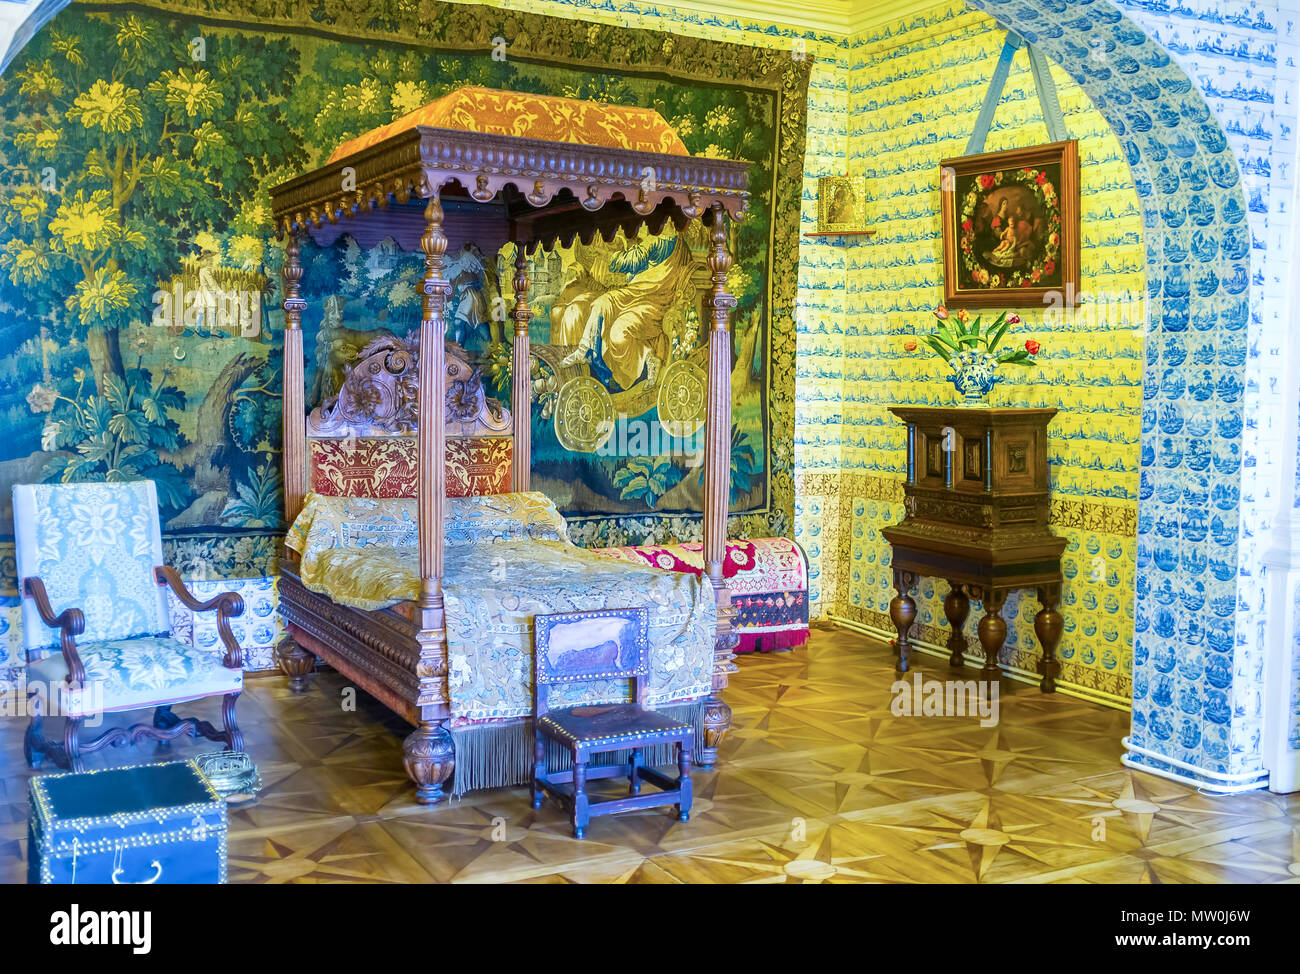 SAINT PETERSBURG, RUSSIA - APRIL 26, 2015: The bedroom of Menshikov Palace richly decorated with Delft's tiles, embroidered tapestry and expensive woo Stock Photo